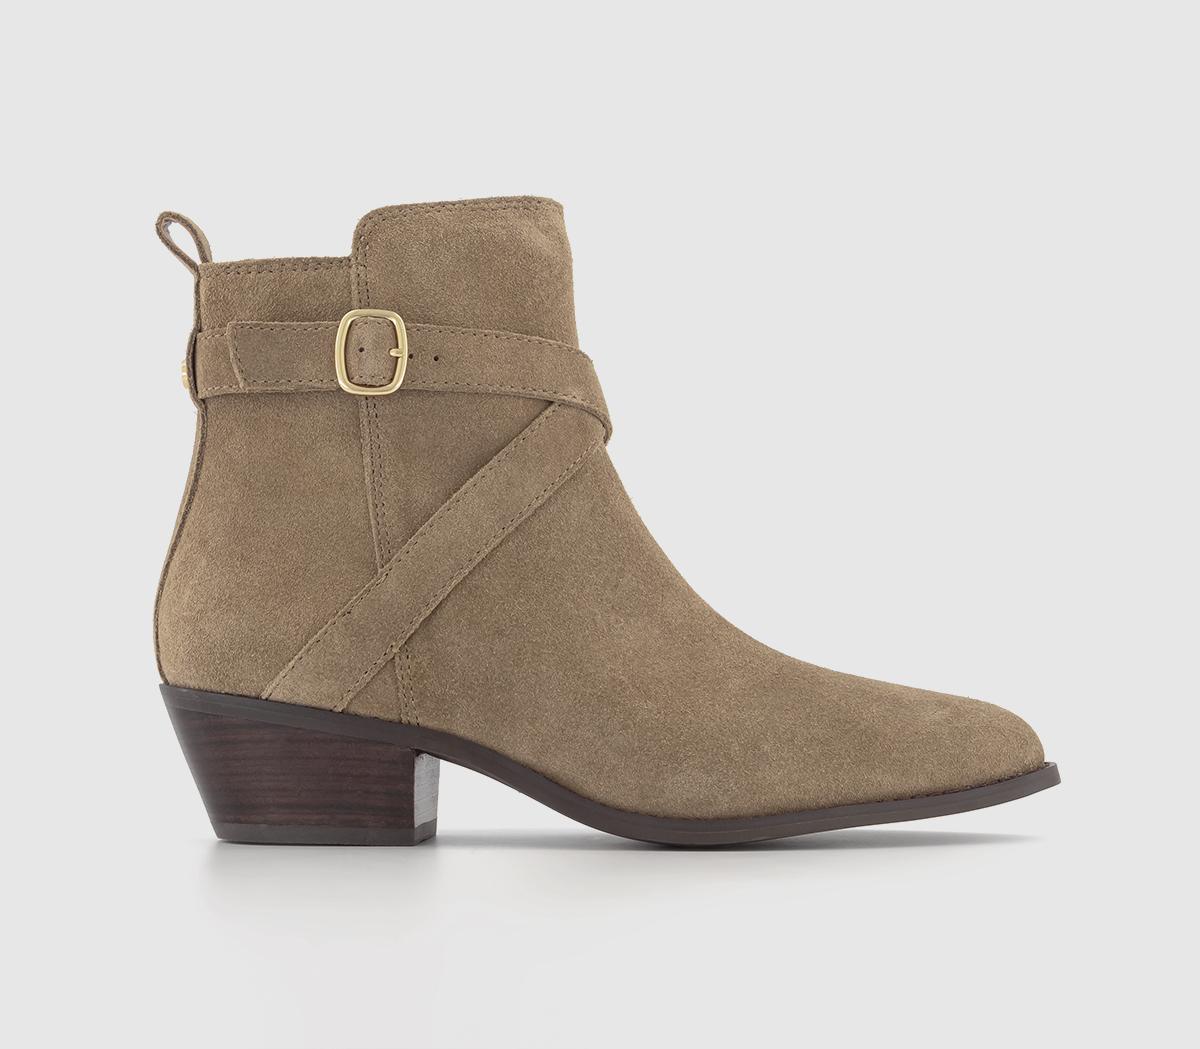 OFFICE Arcade Strap Detail Pointed Toe Ankle Boots Taupe Suede - Women ...